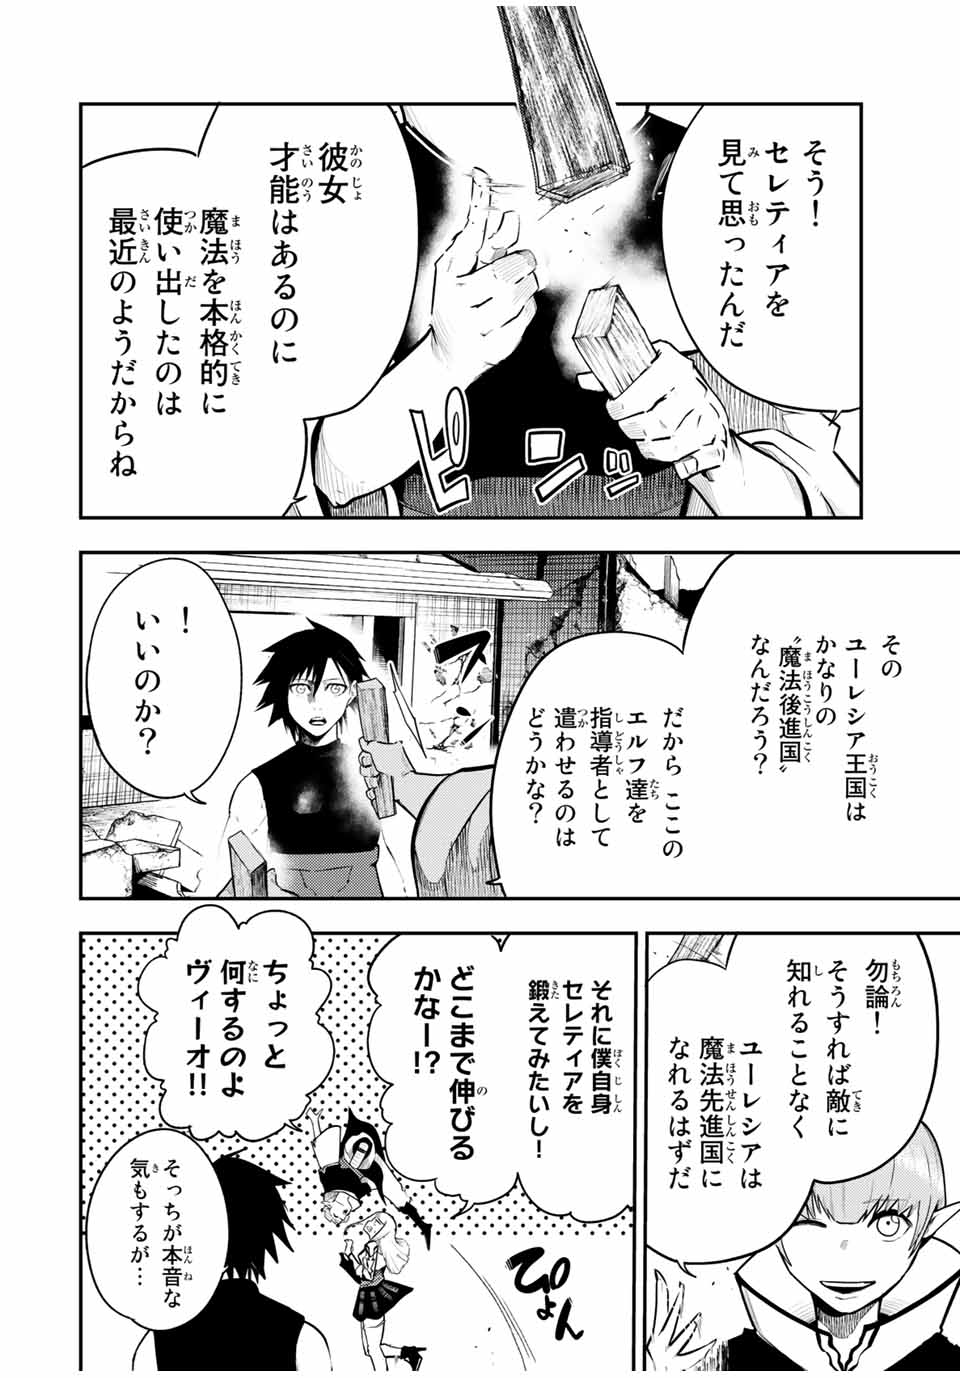 the strongest former prince-; 奴隷転生 ～その奴隷、最強の元王子につき～ 第50話 - Page 16